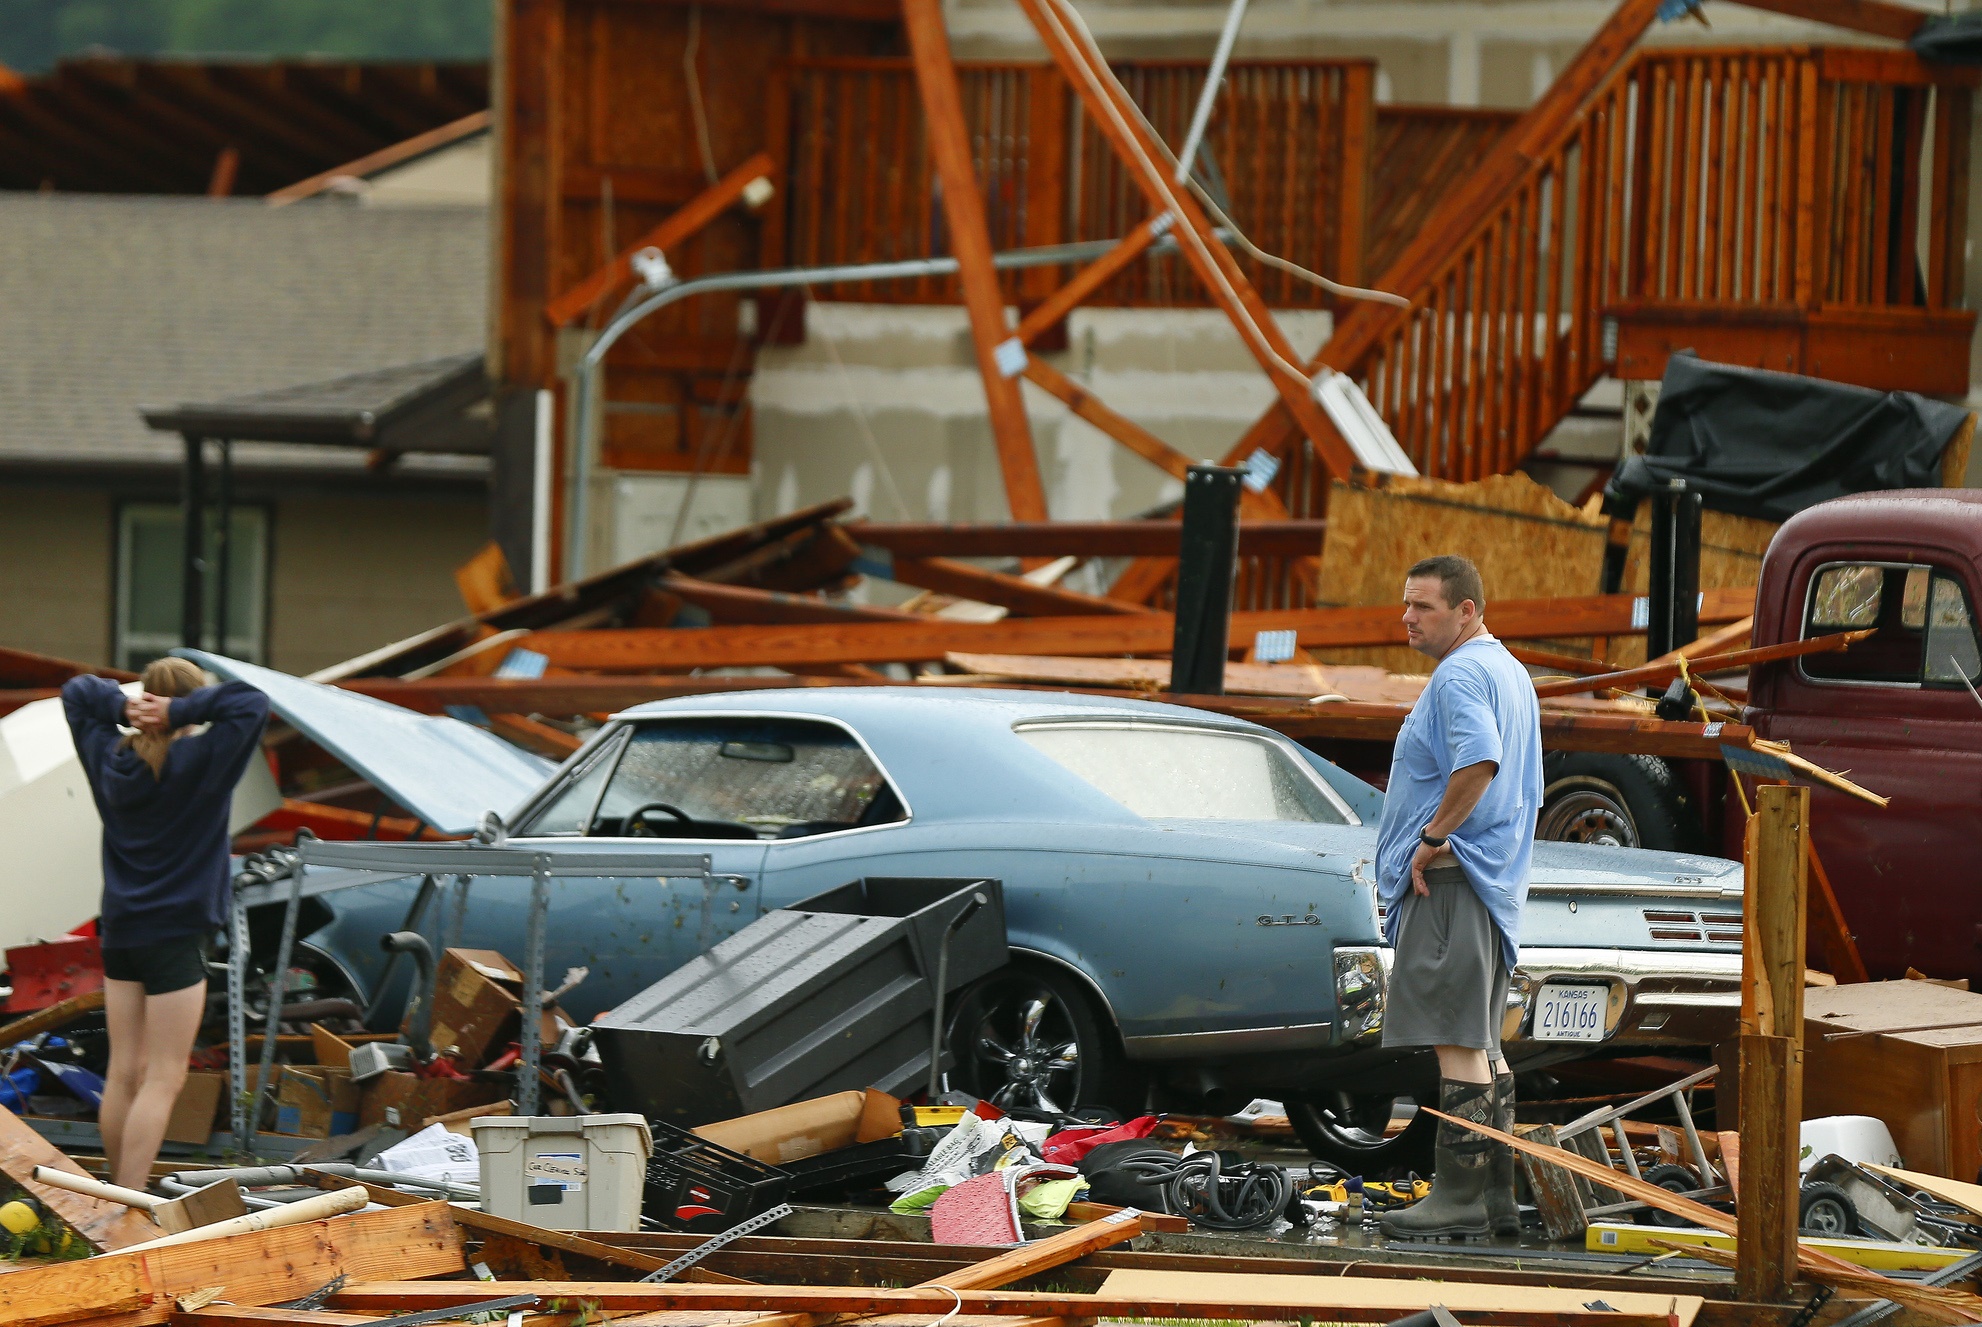 PHOTO: A man and woman inspect the damage to their home and classic cars after being hit by a tornado on Tuesday, May 28, 2019, in a neighborhood south of Lawrence, Kan., near US-59 highway and N. 1000 Road. 